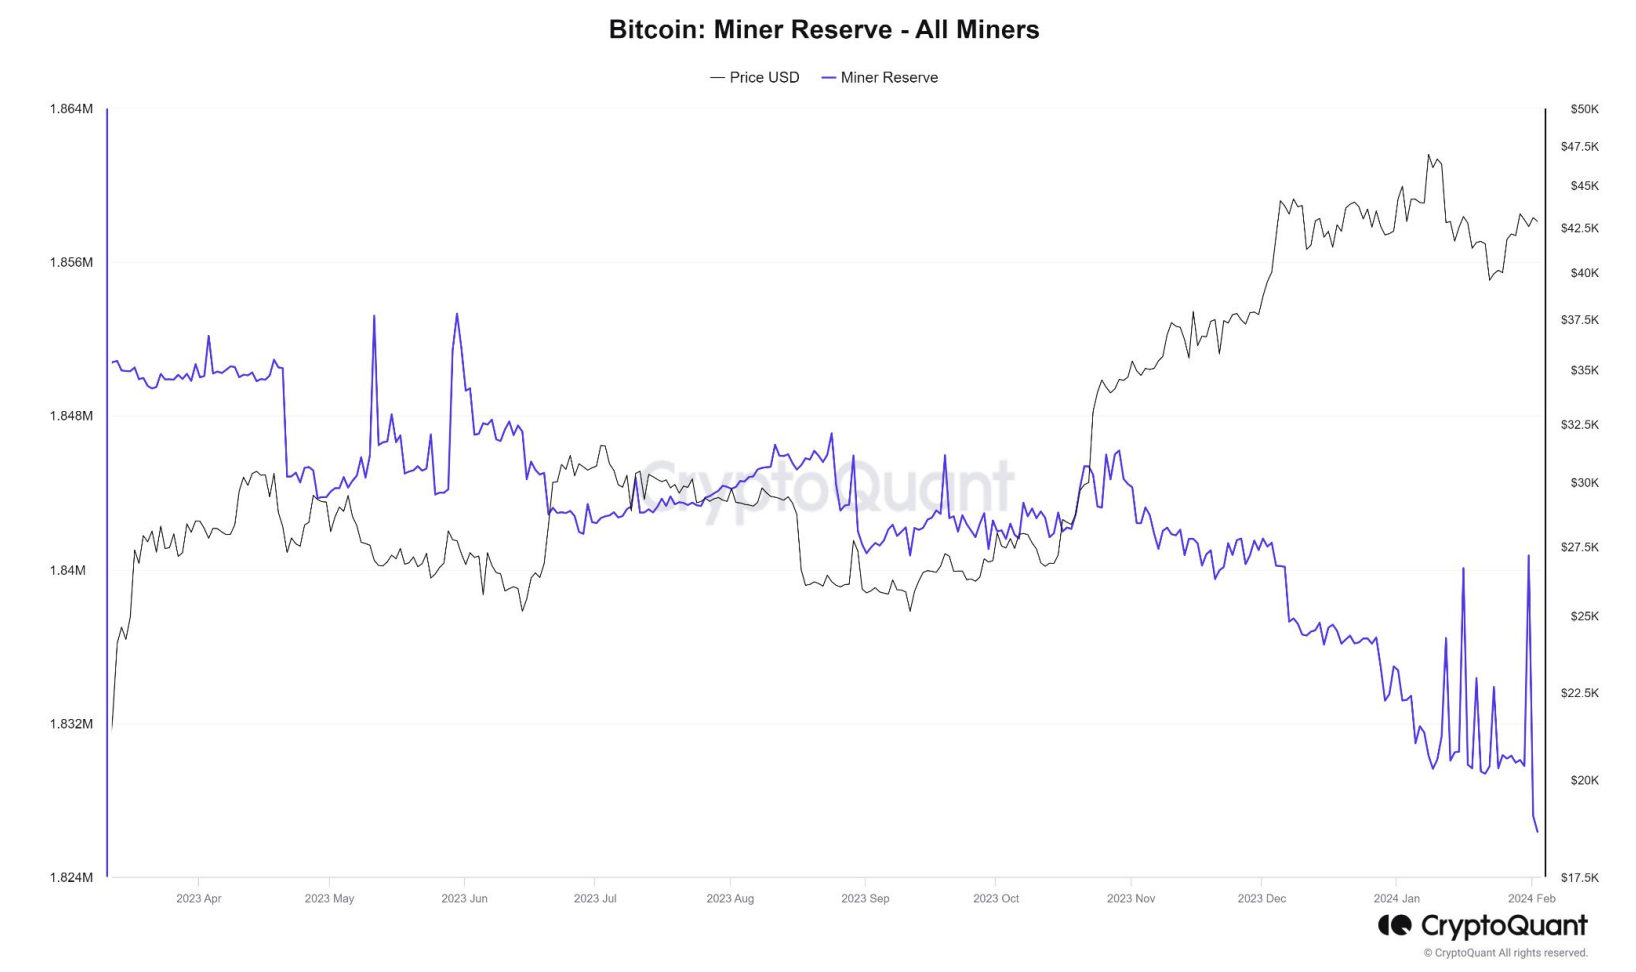 Bitcoin miner reserve hits its lowest point since June 2021